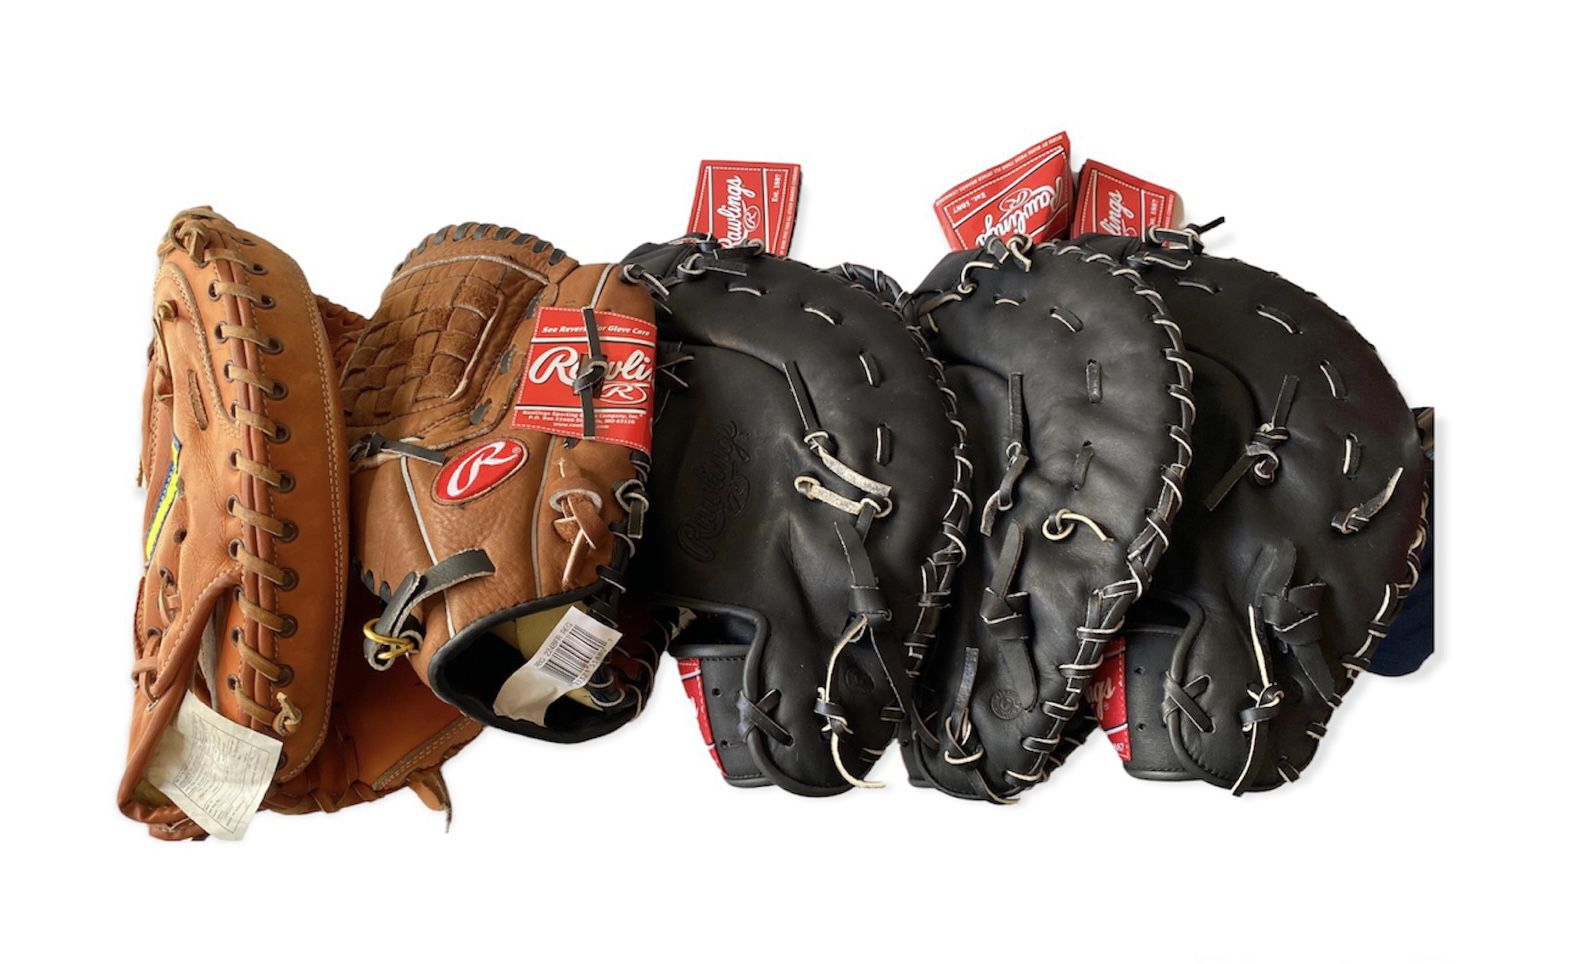 5 Baseball Gloves- 4 New(Rawling), 1 Gently used (Cooper)